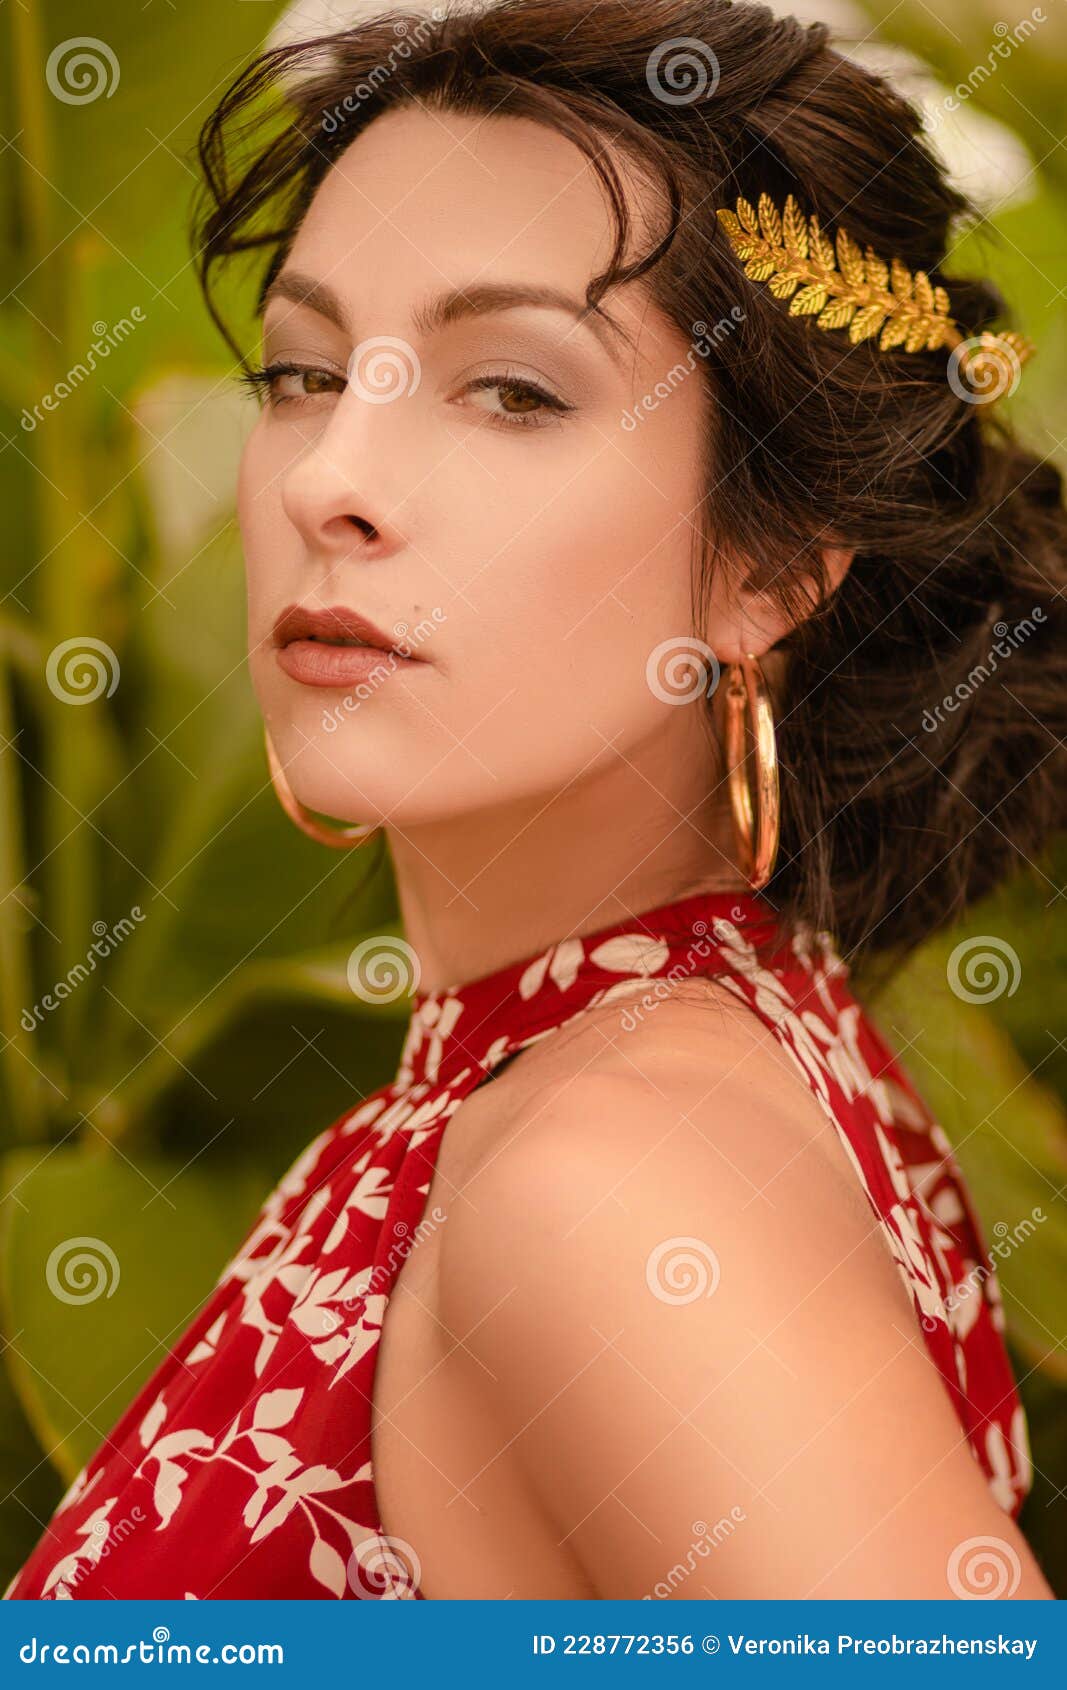 A Beautiful Girl In A Red Dress And With Earrings In The Rings In The Greenhouse Woman In